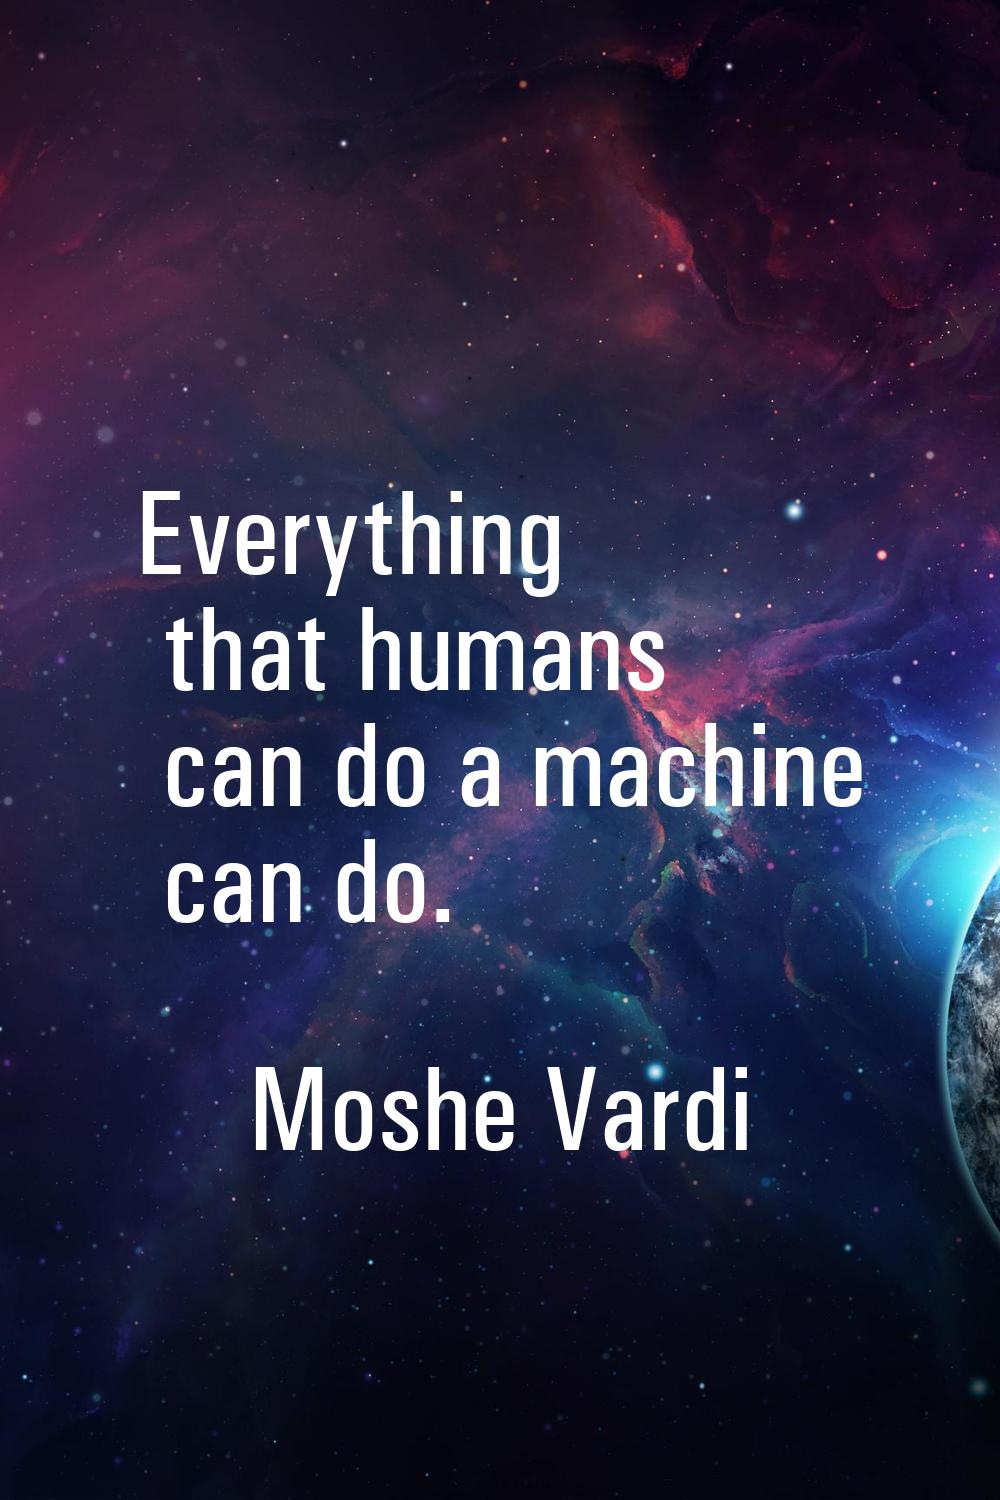 Everything that humans can do a machine can do.